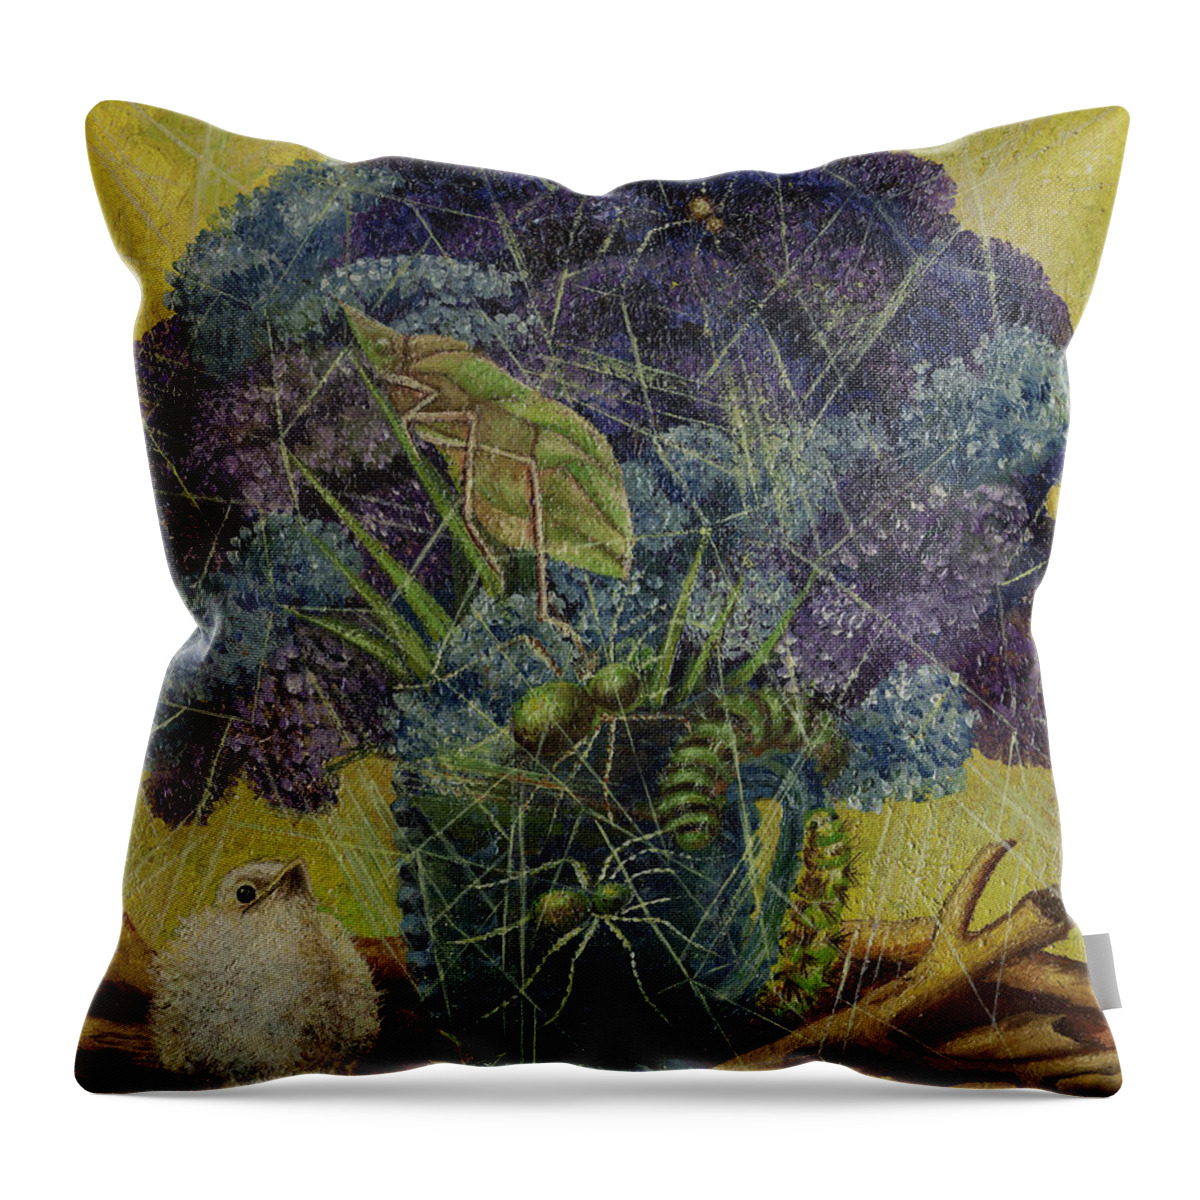 Frida Kahlo Throw Pillow featuring the painting The Chick by Frida Kahlo